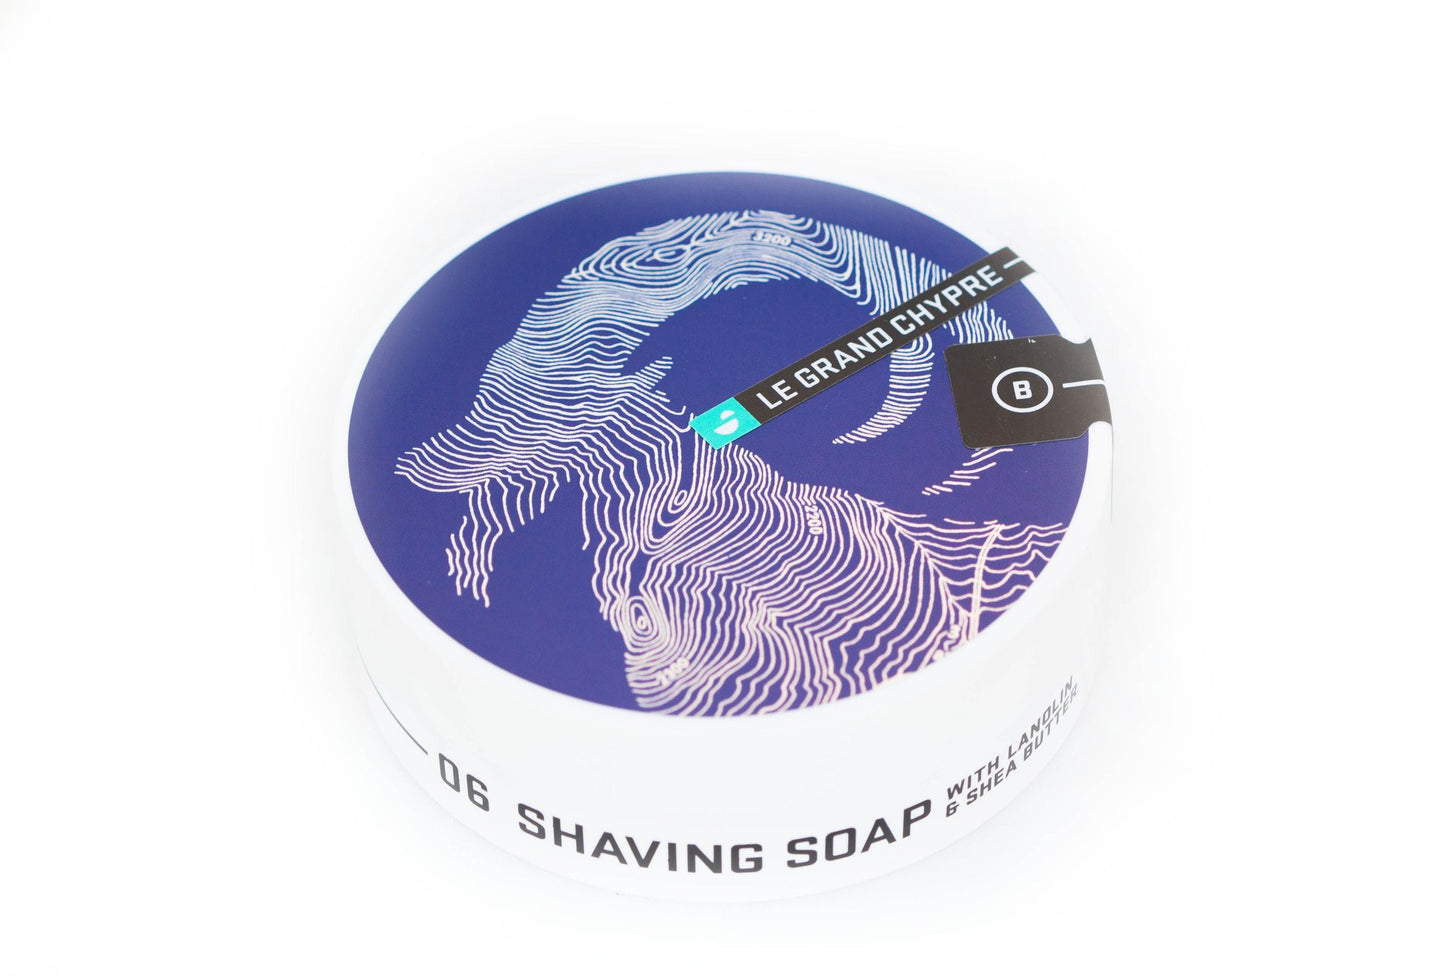 Barrister & Mann Shave Soap Le Grand Chypre